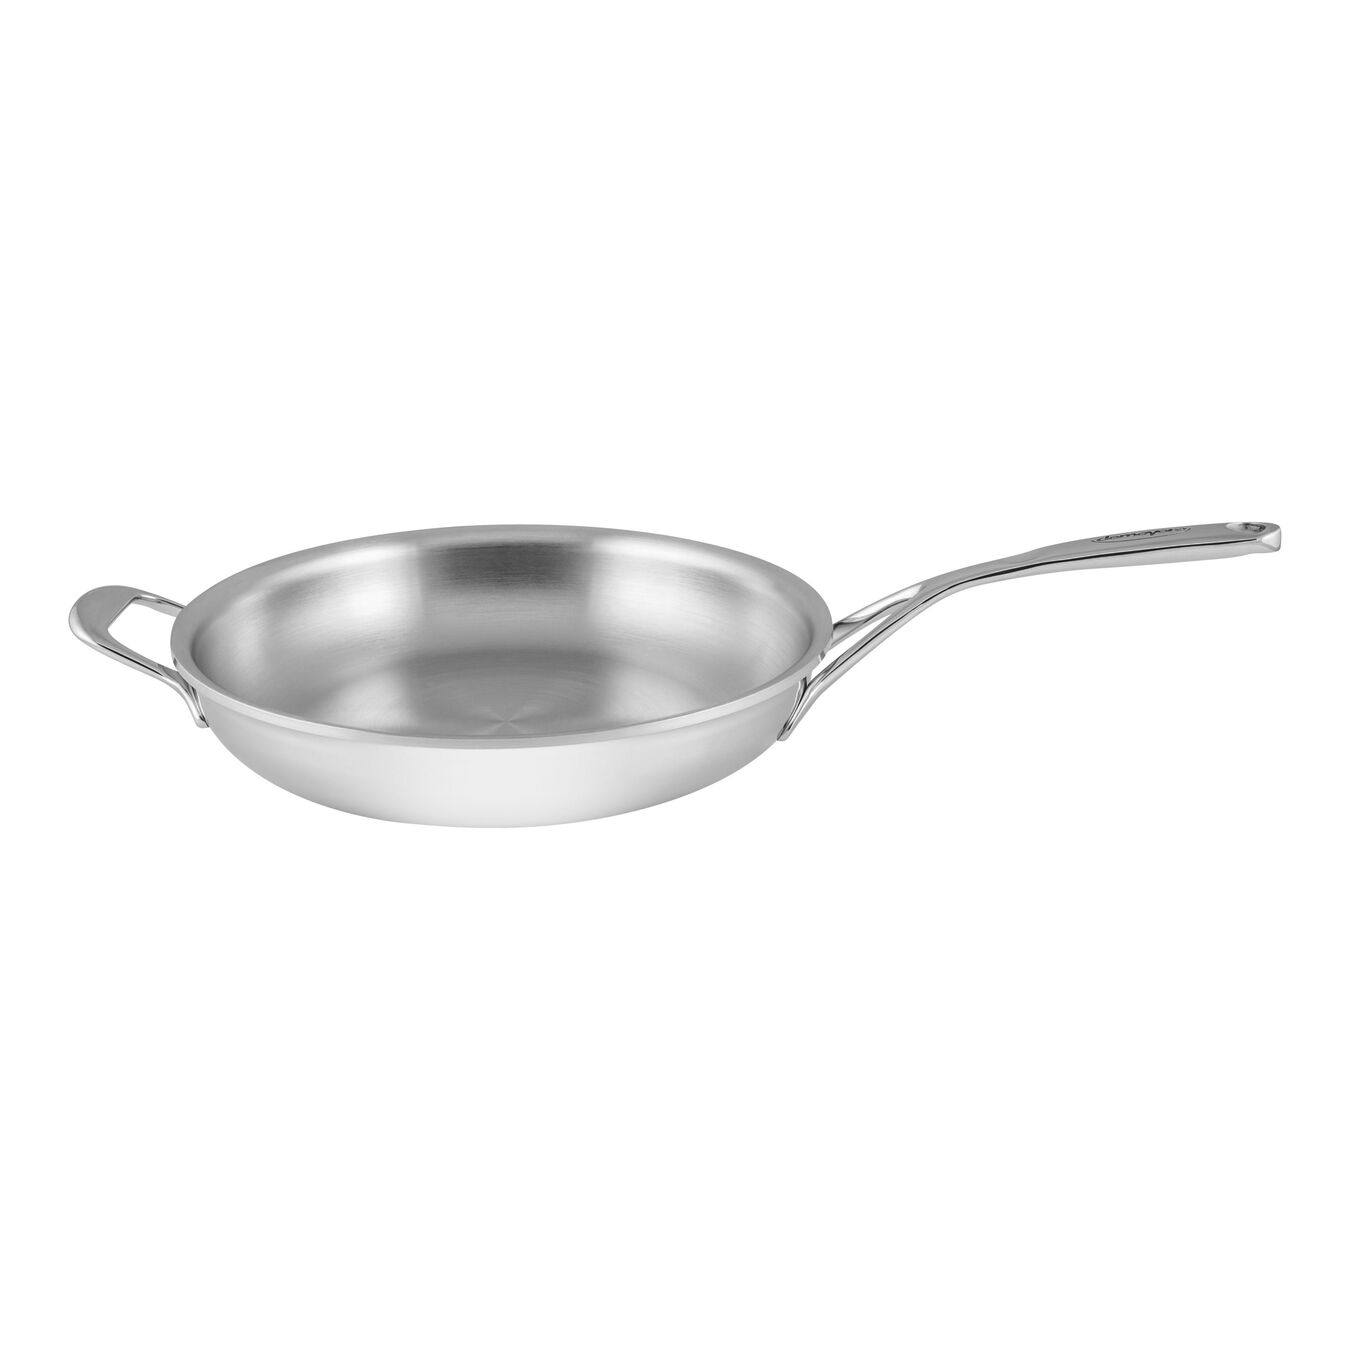 11-inch, 18/10 Stainless Steel, Proline Fry Pan with Helper Handle,,large 1